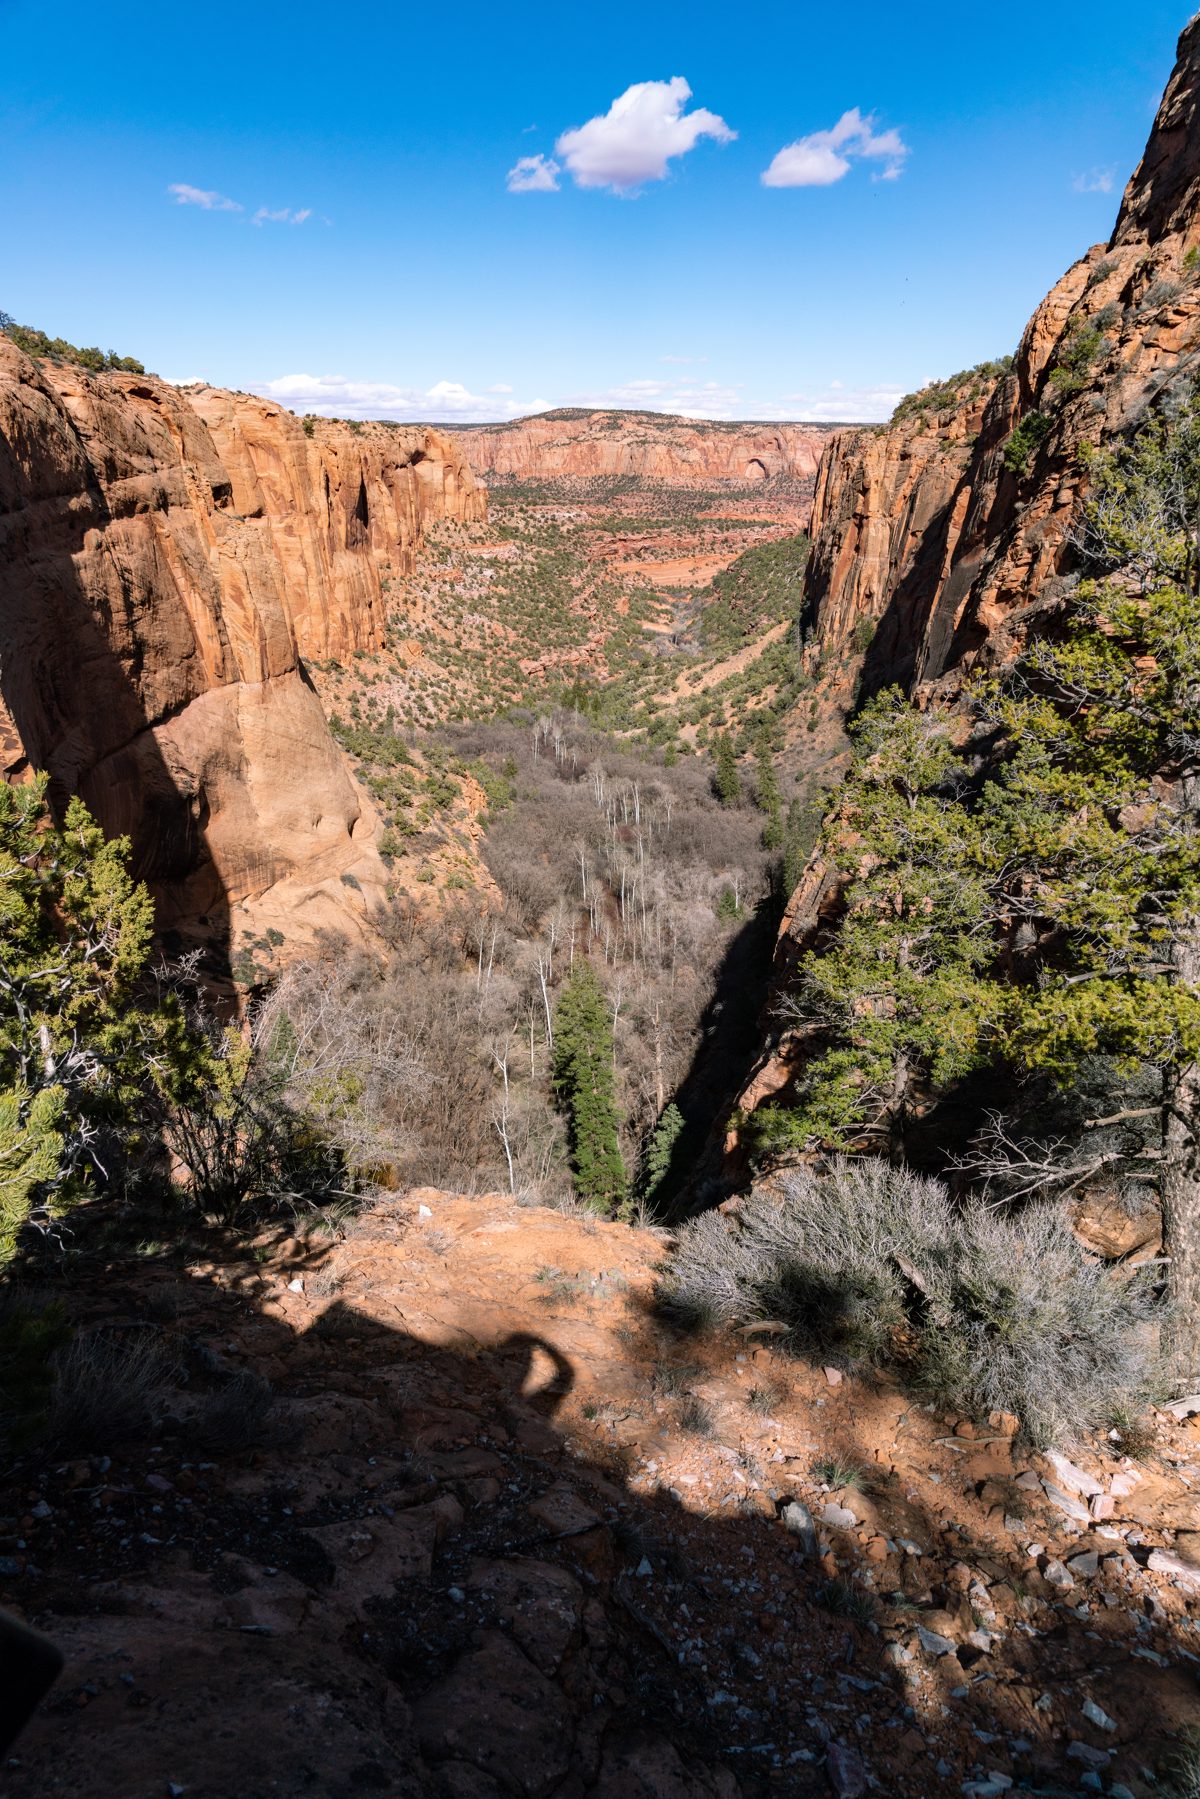 2019 March Looking down the Tsegi Side Canyon with Betatakin